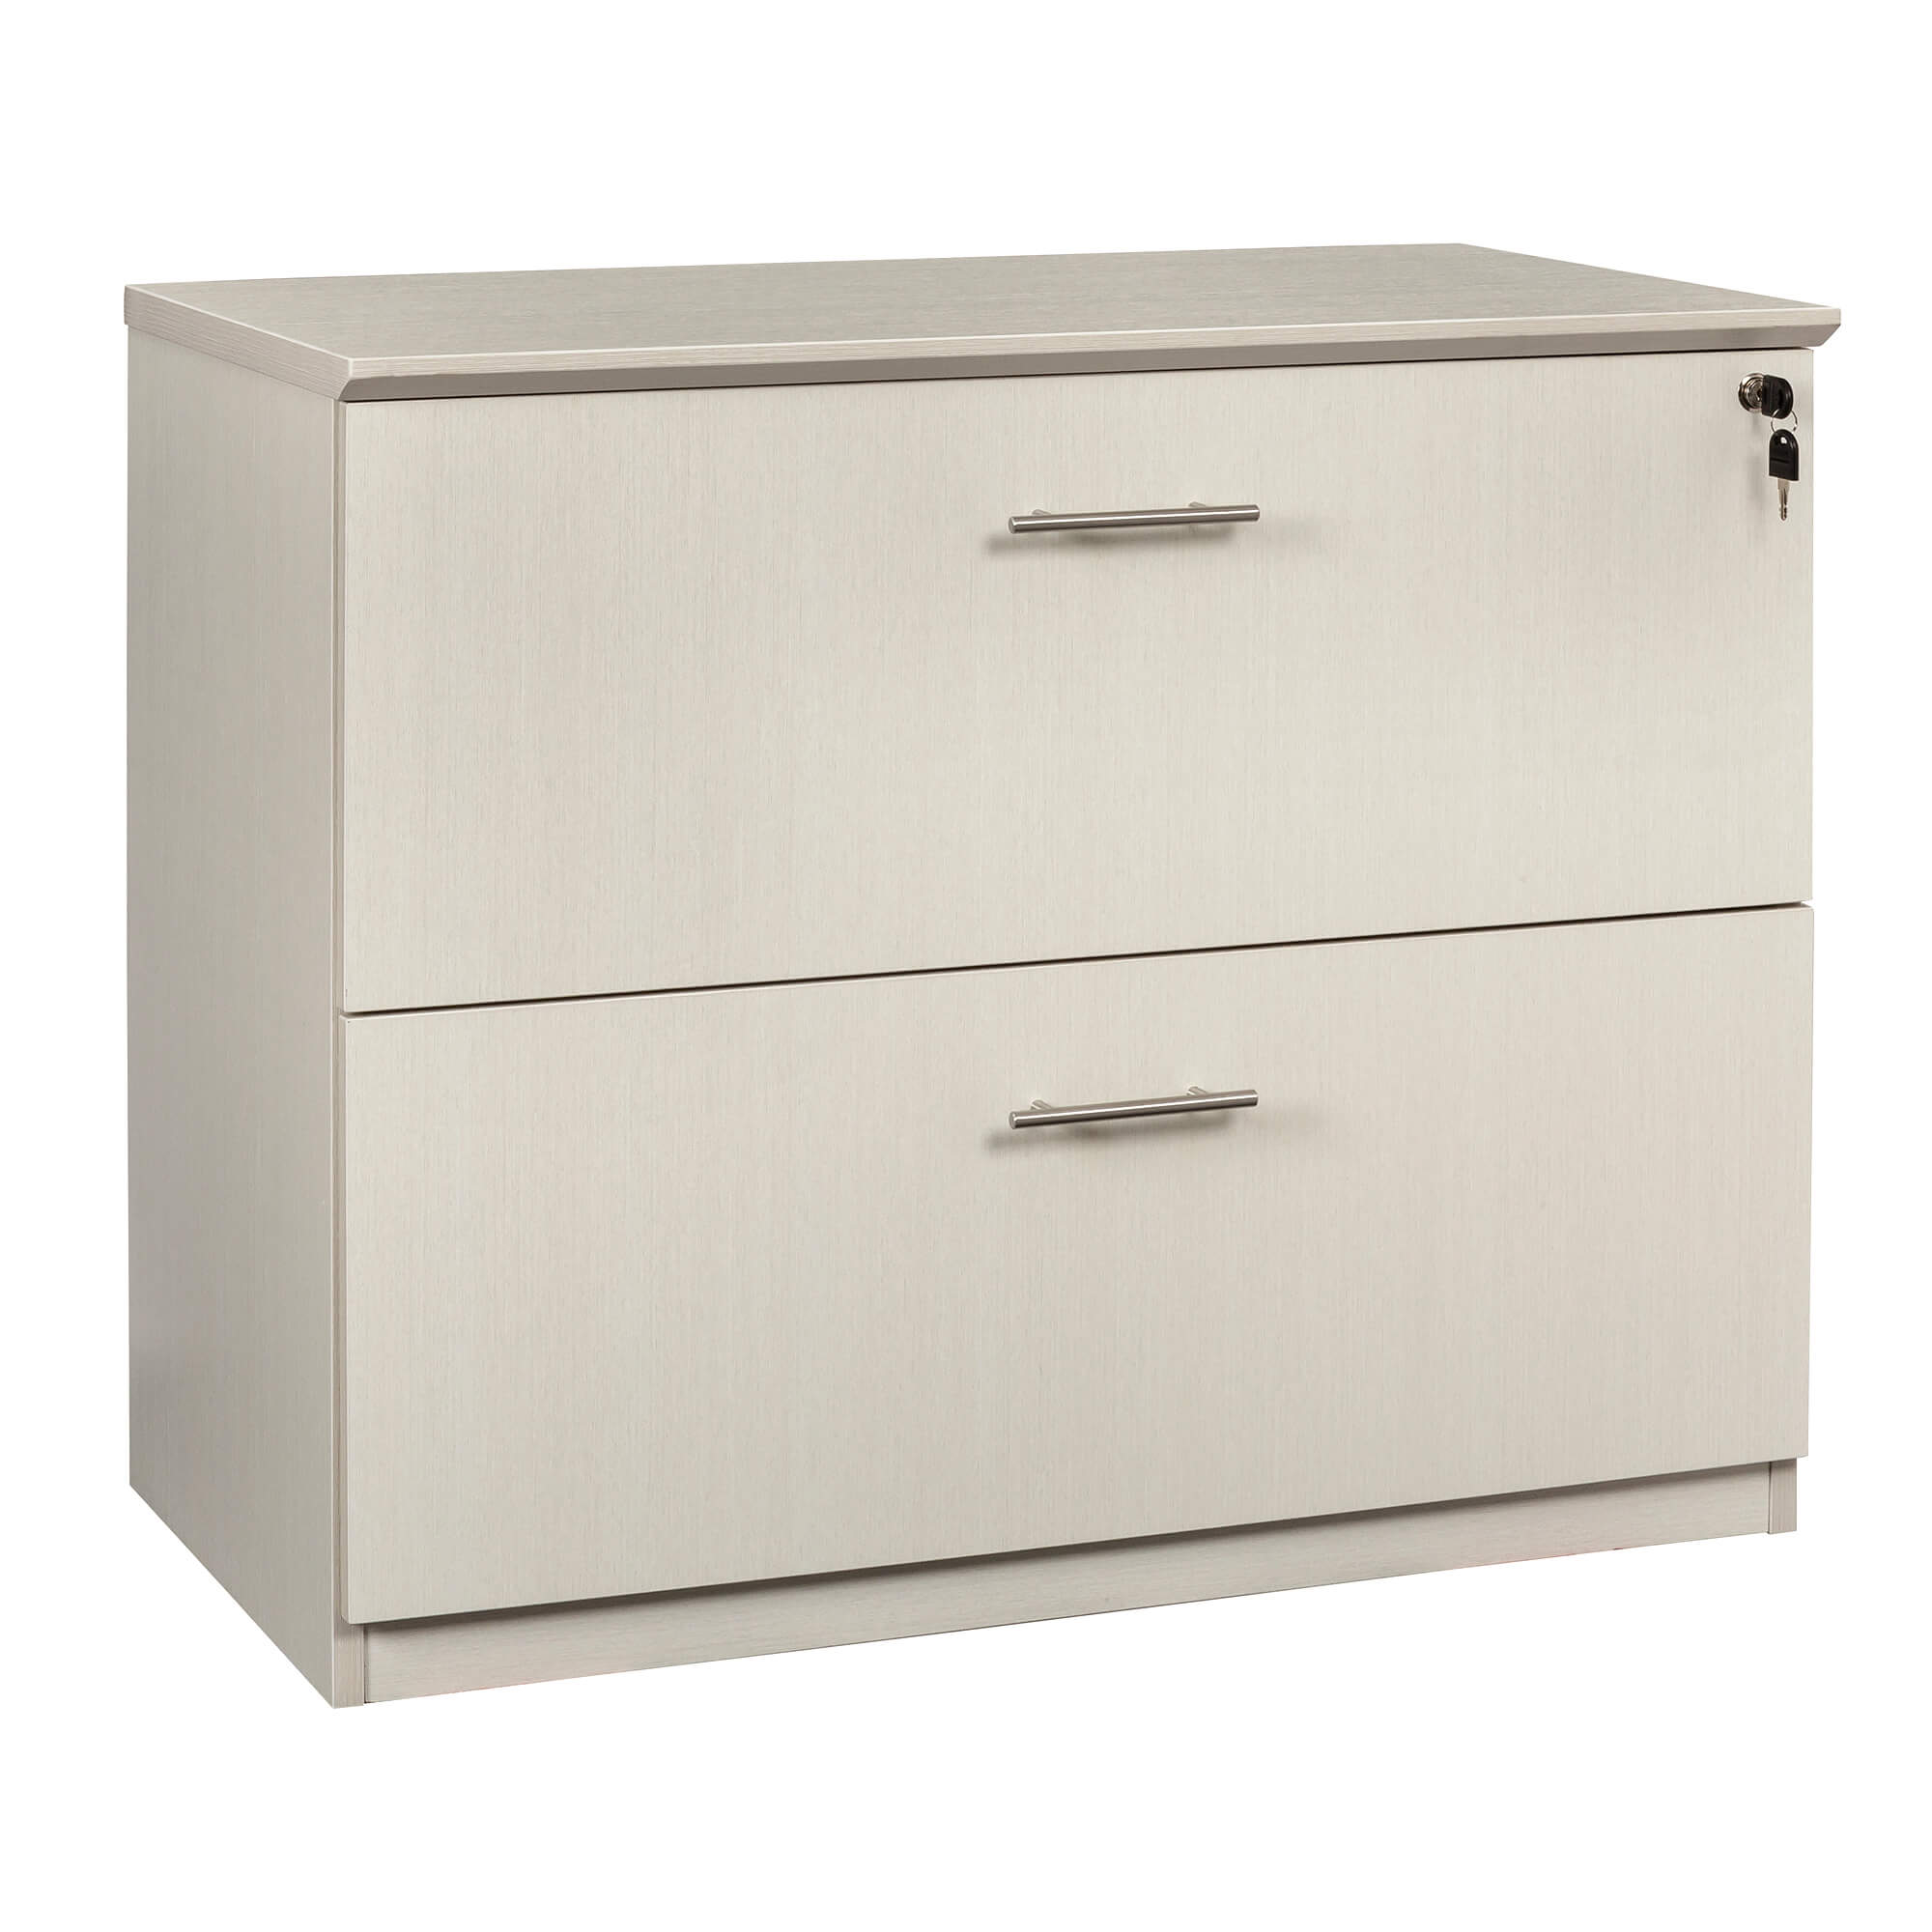 Conference room storage and accessories CUB MVLFTSS FAS